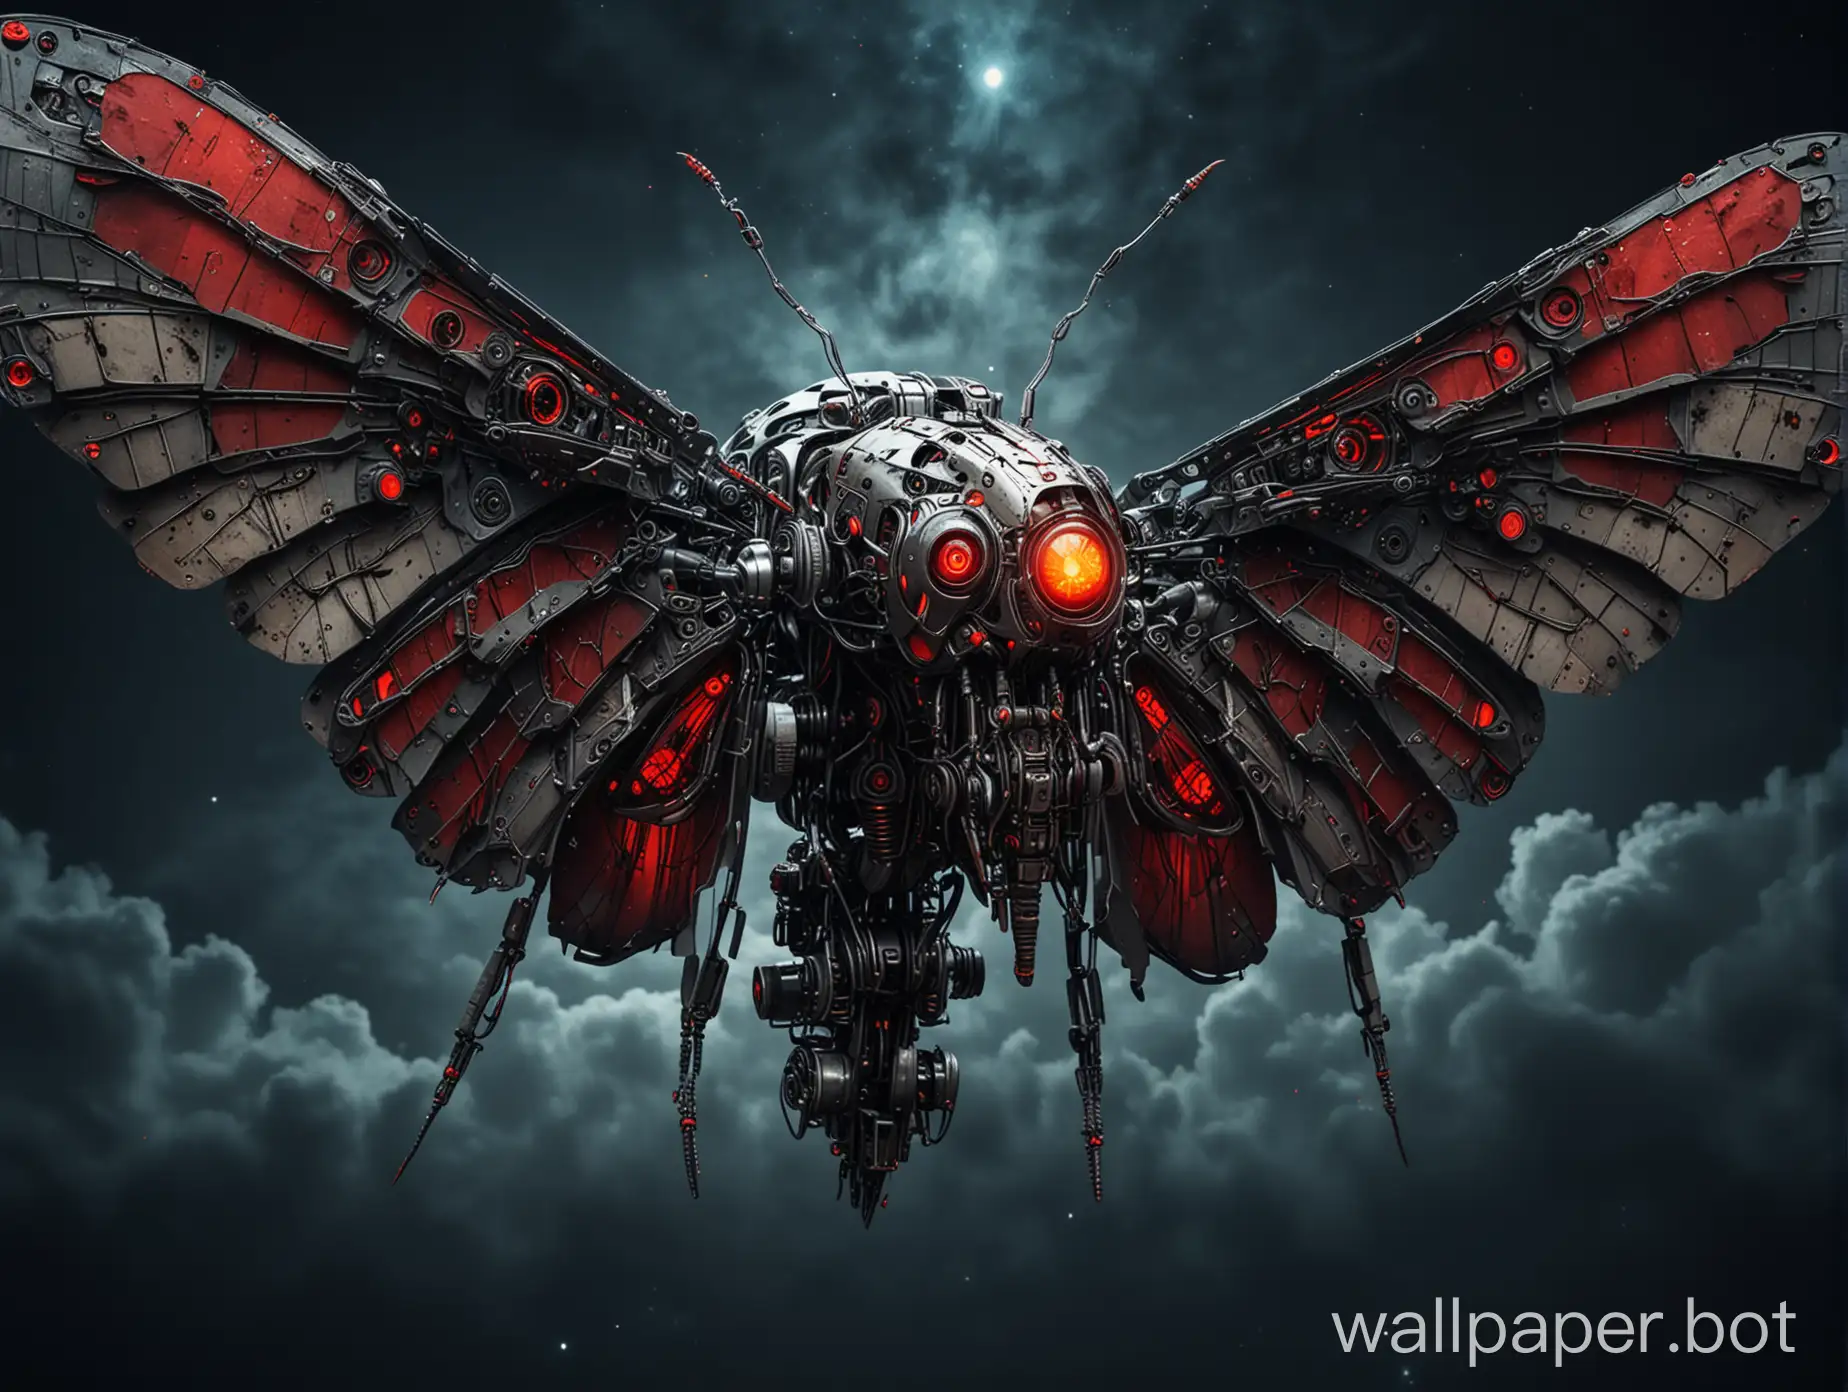 Cyberpunk-Mechanical-Moth-with-Red-Eyes-Flying-in-the-Night-Sky